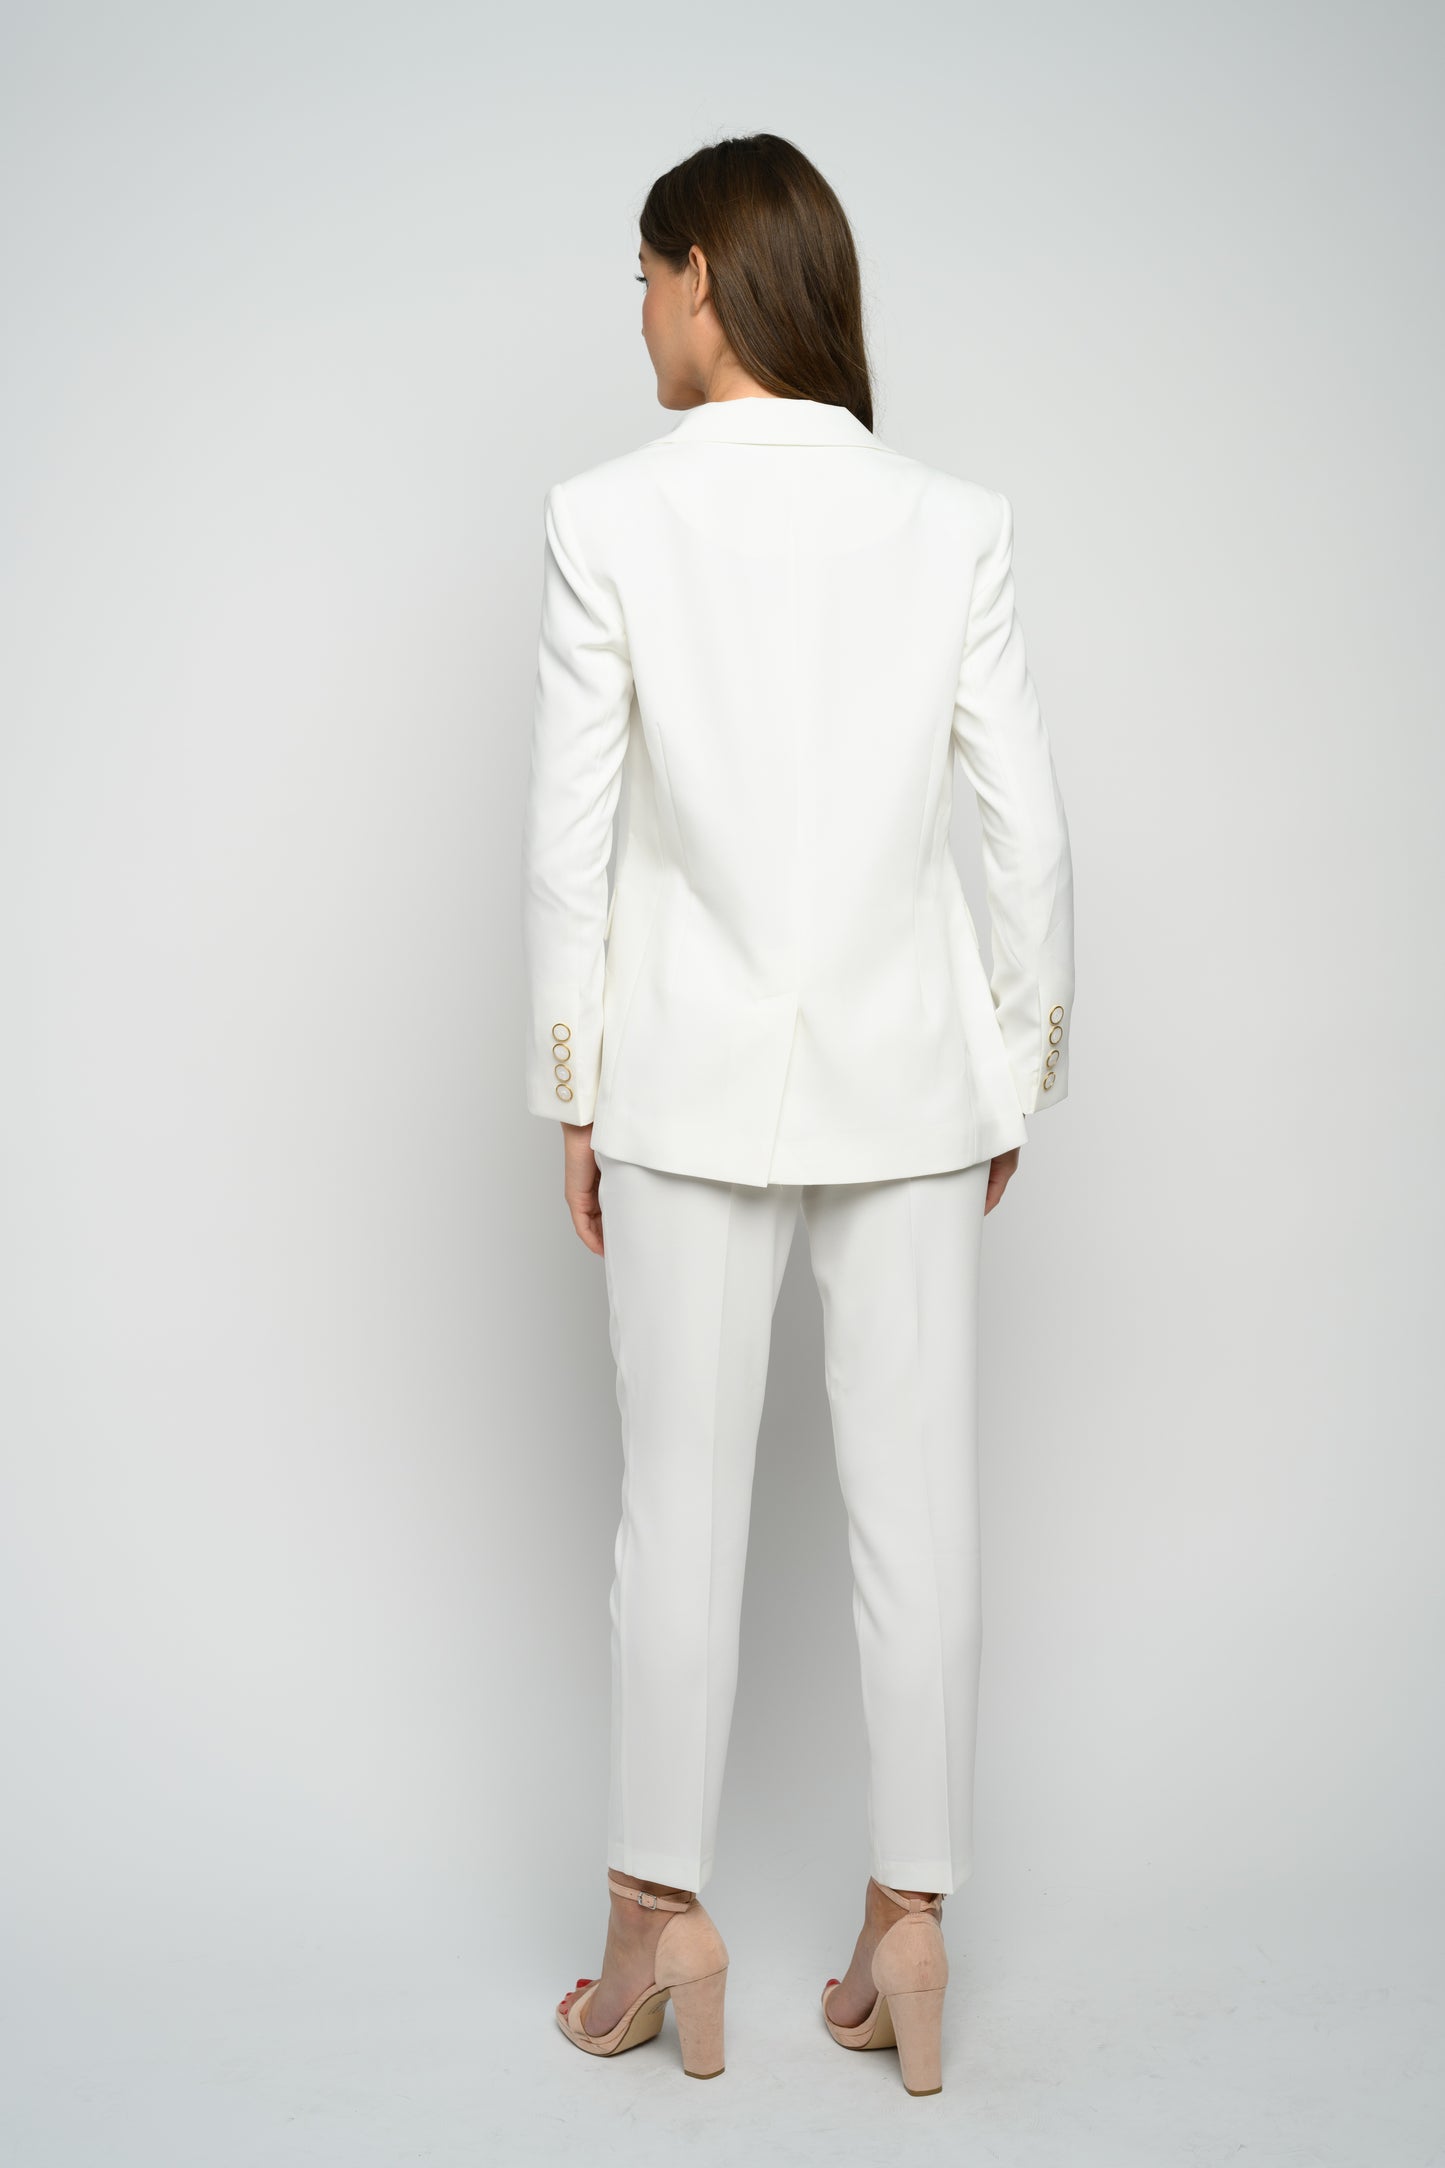 OMC 2-Pieces Women's Ivory Luxe Suit